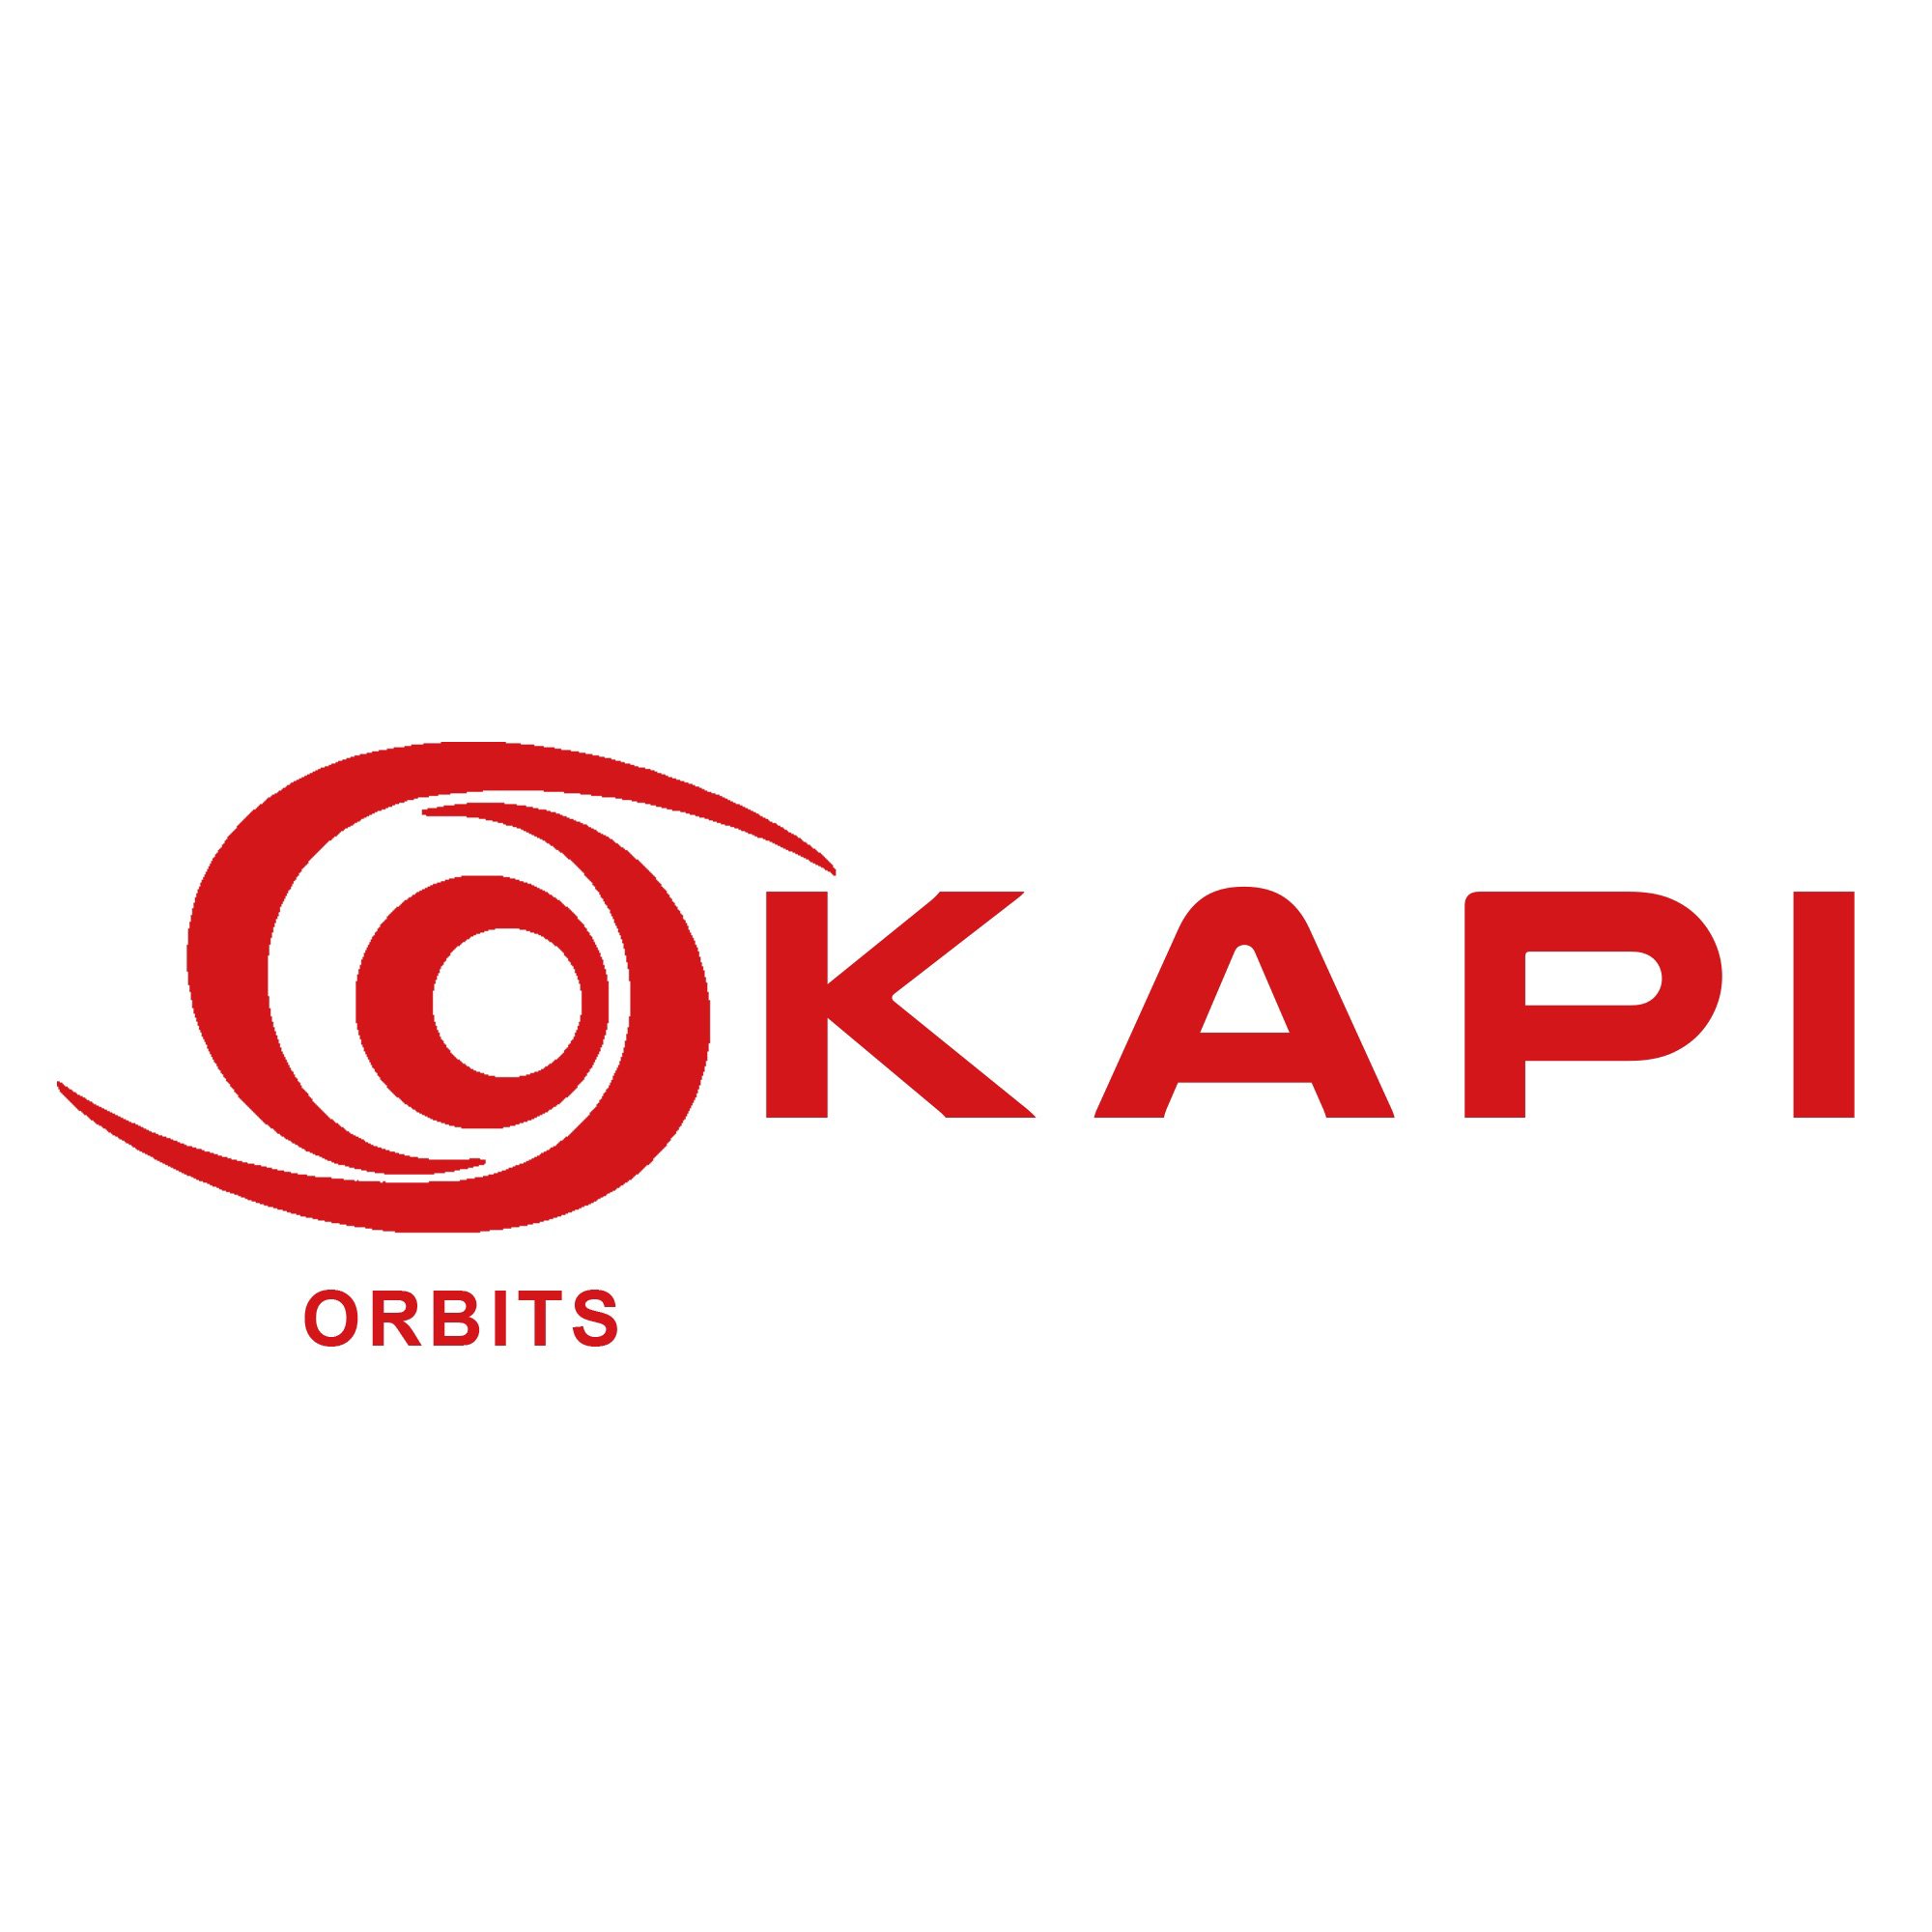 OKAPI:Orbits is an innovative SaaS startup dedicated to make space travel more sustainable through Collision Avoidance Software for satellites.